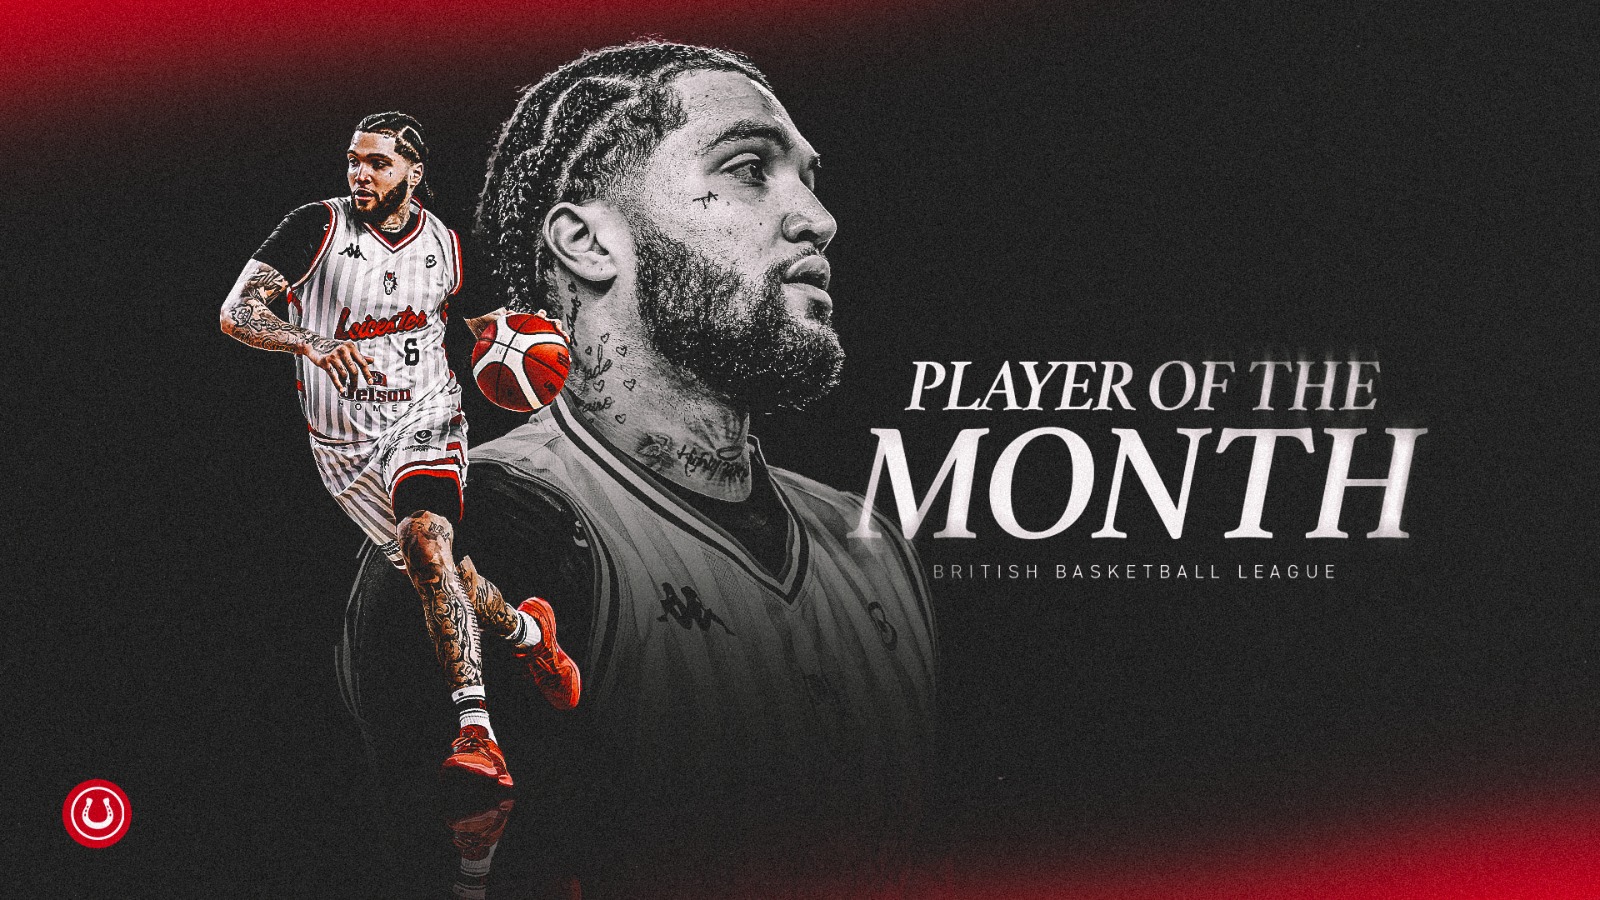 Teddy Allen named British Basketball League Player of the Month for February